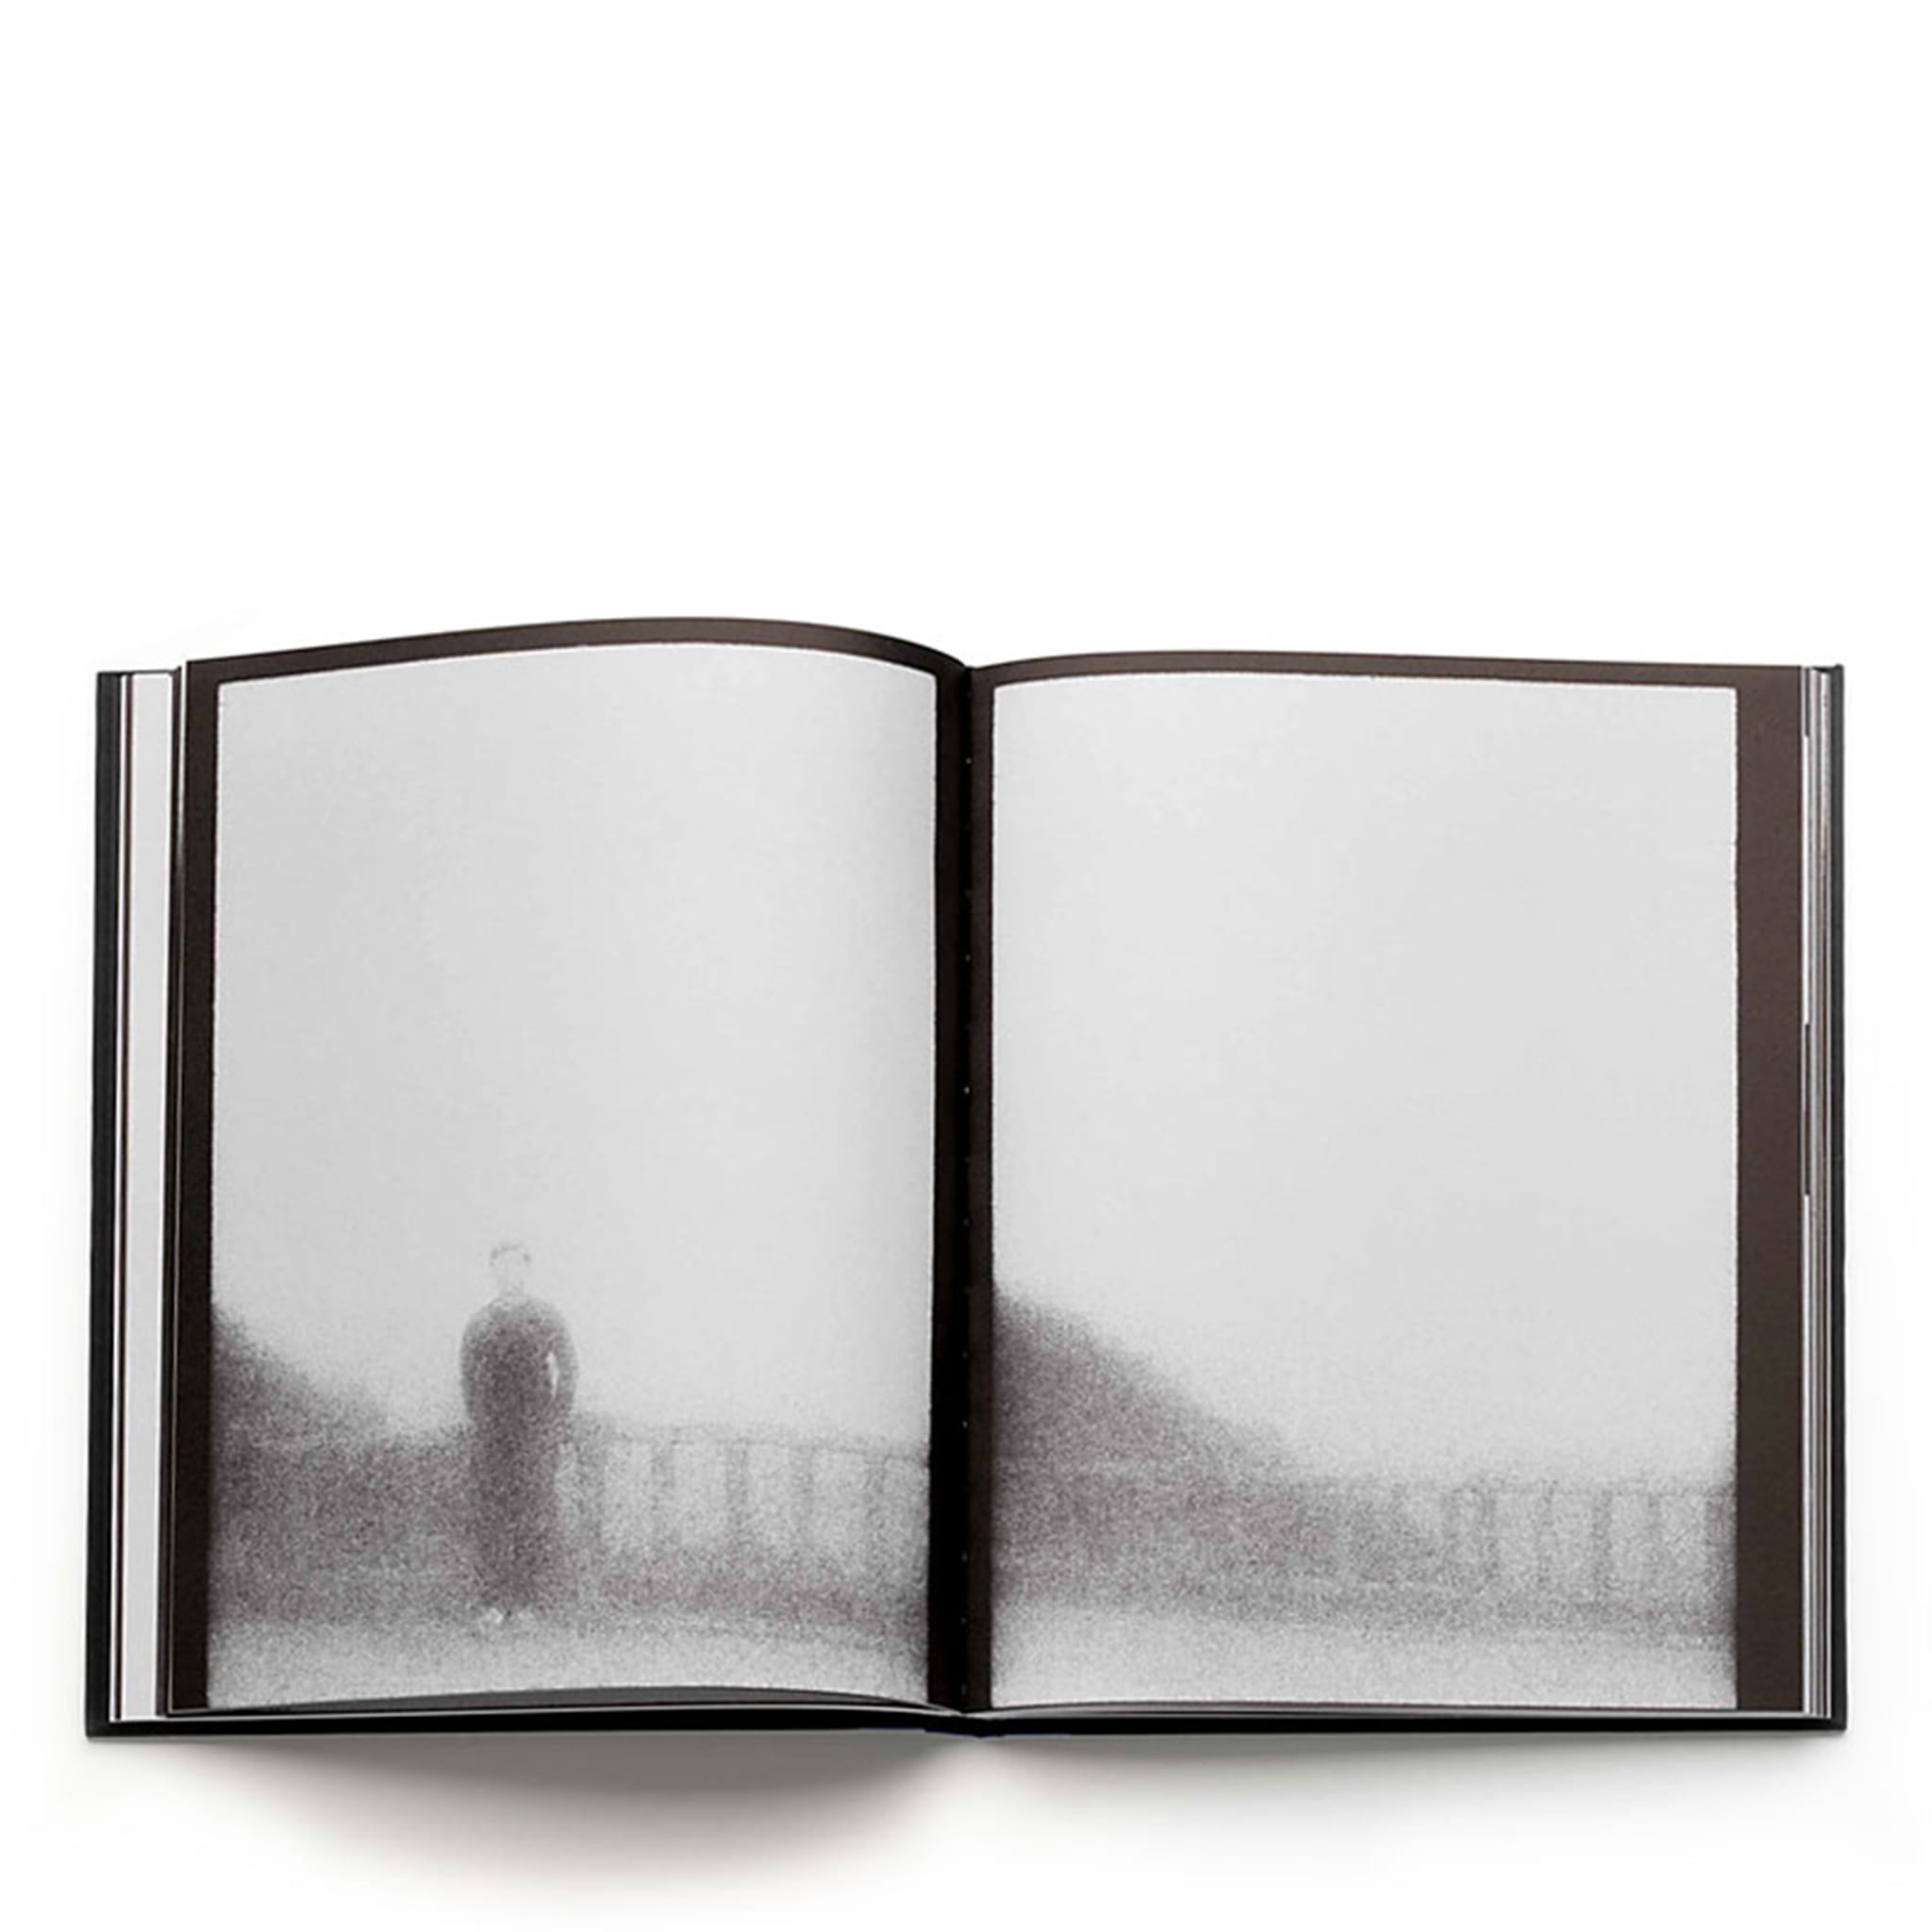 Path In Between - Special Edition Box Set - Hajime Kimura - Limited Edition of 25 copies - Alternative view 4